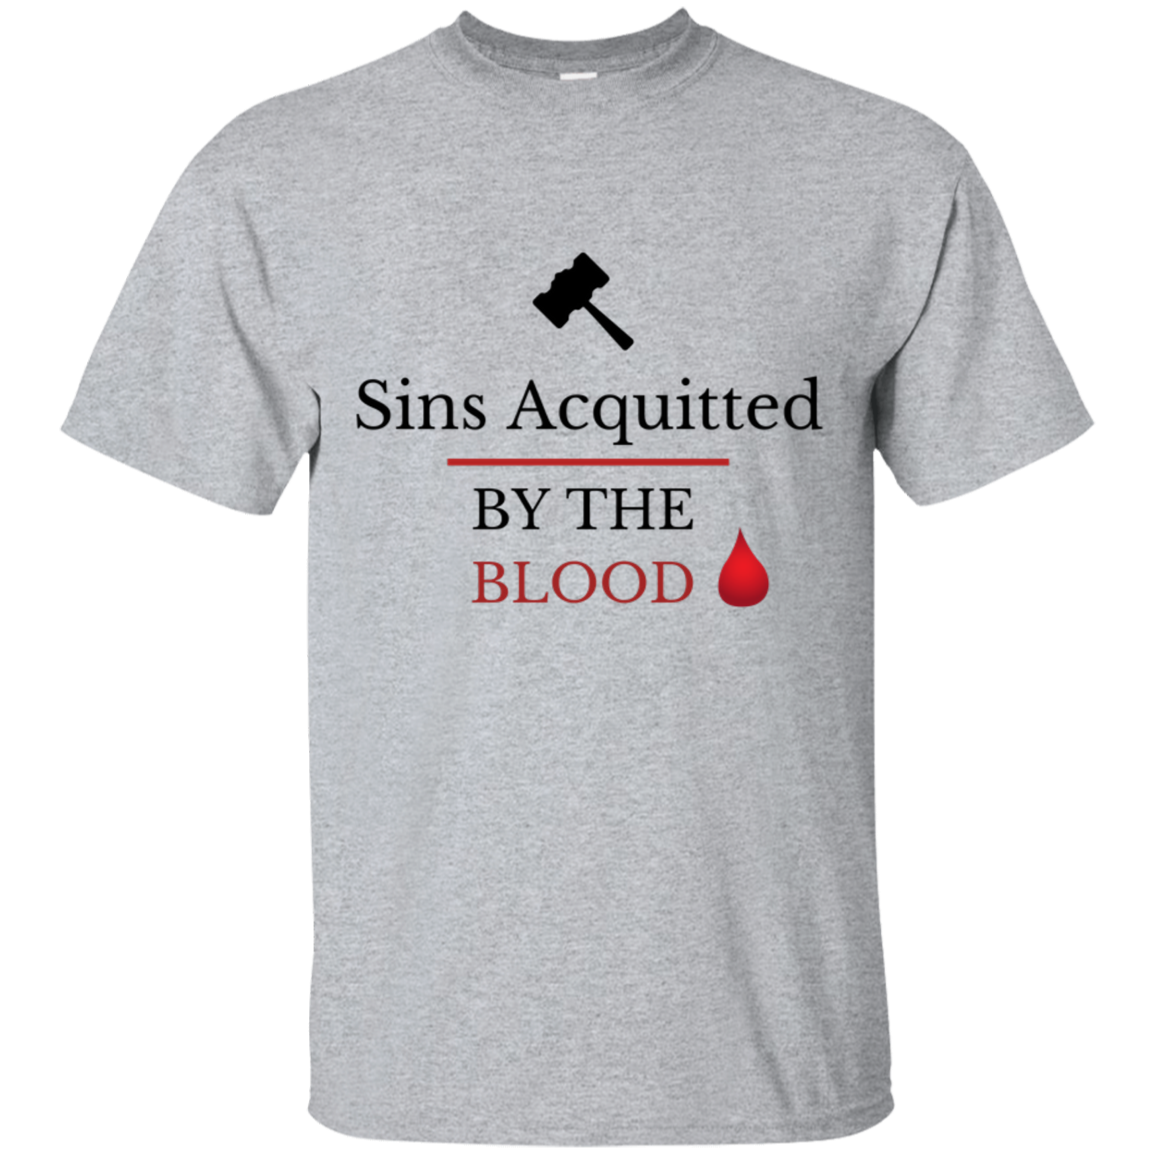 Sins Acquitted Tee